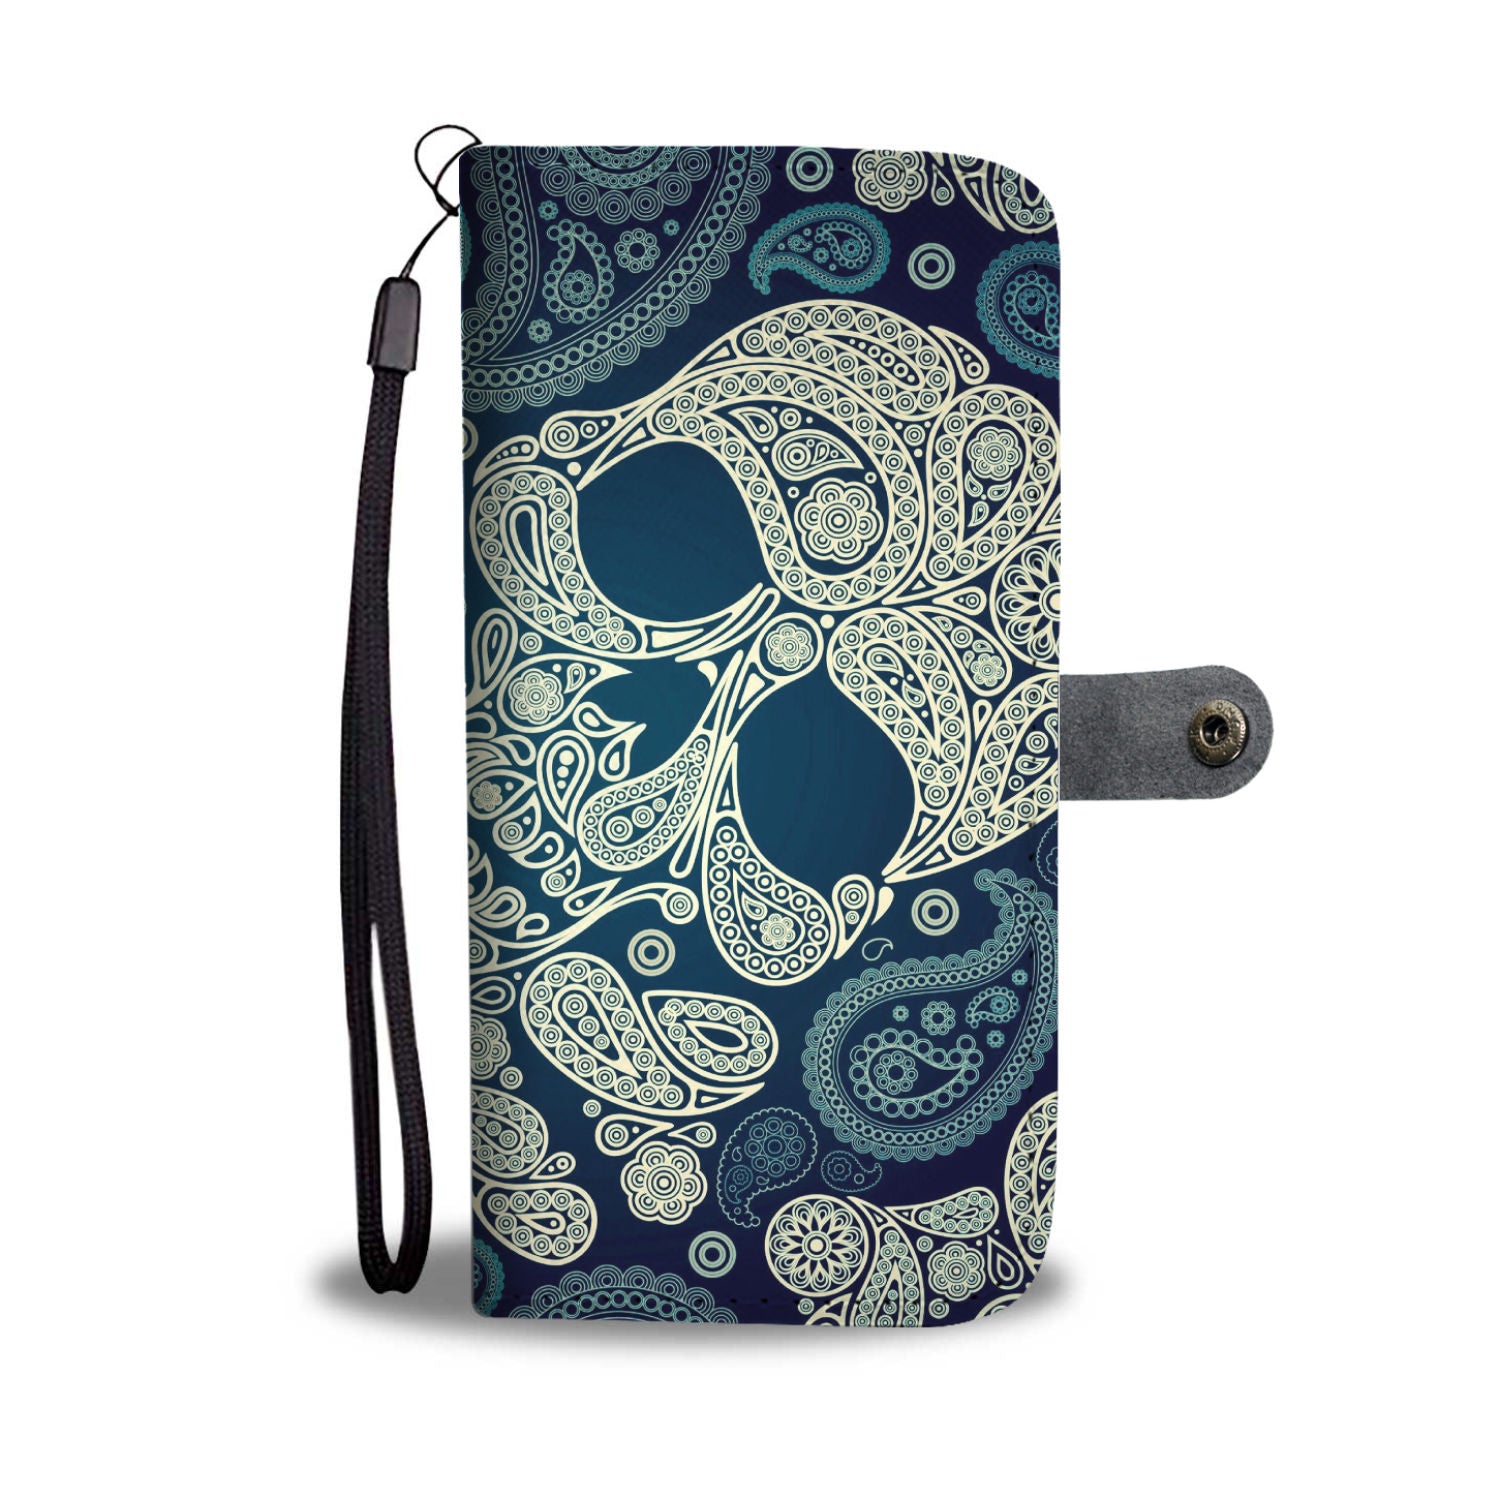 Sugar skull day of the dead wallet phone case